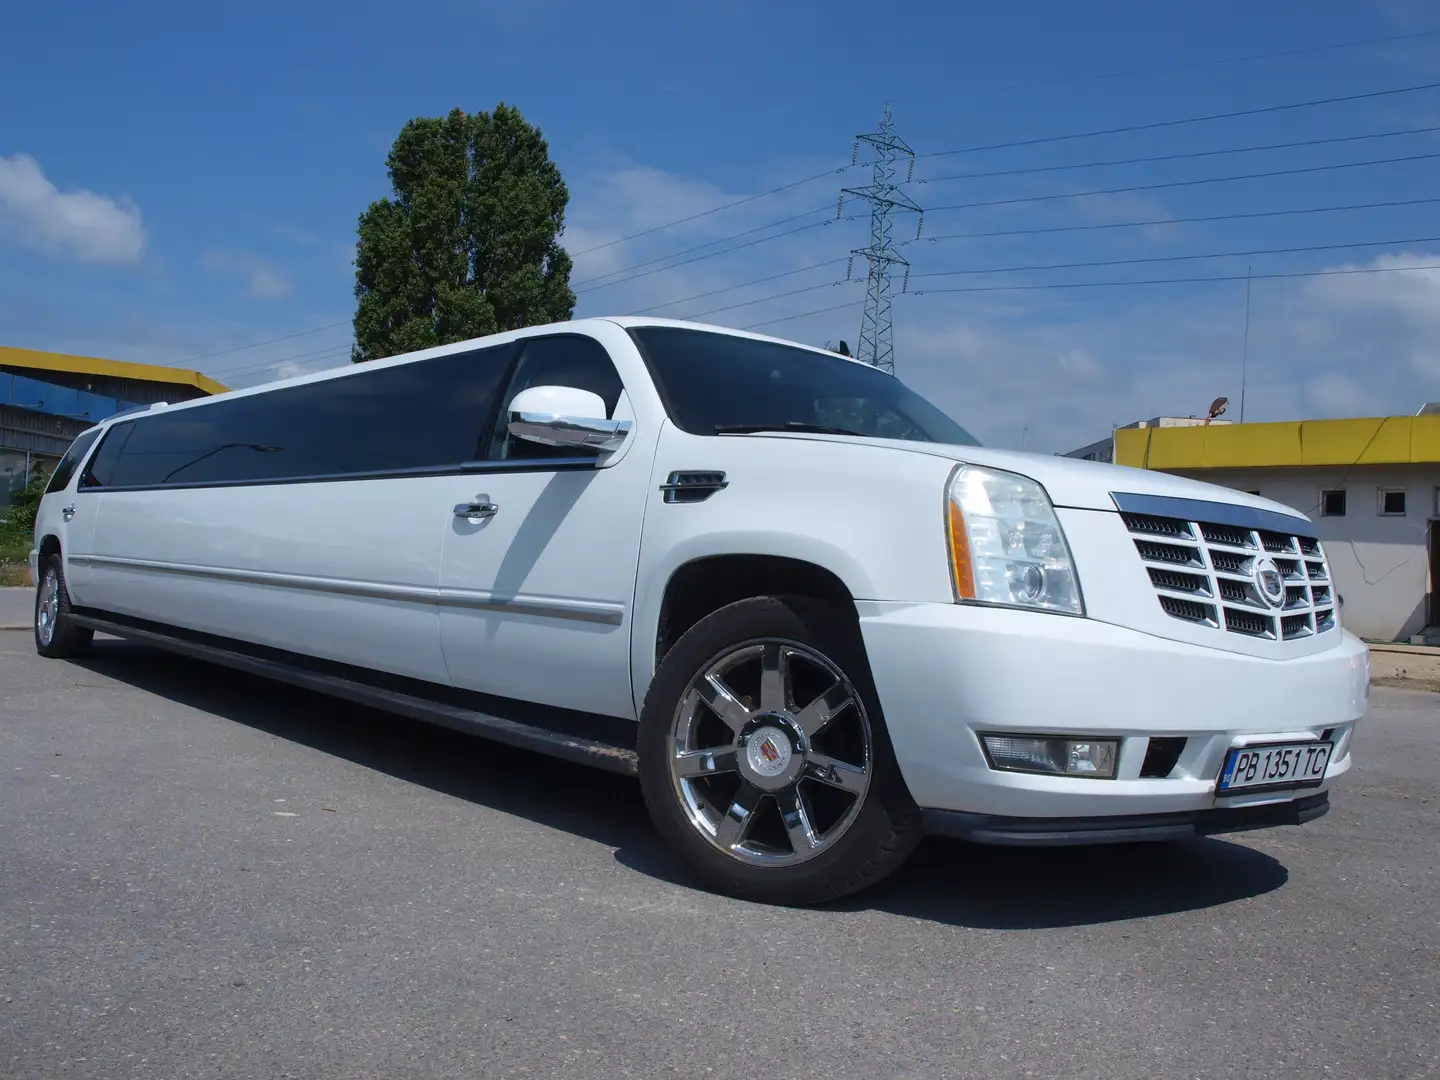 Cadillac Escalade 203-inch Stretch Limousine by Moonlight Industries Wit - 1